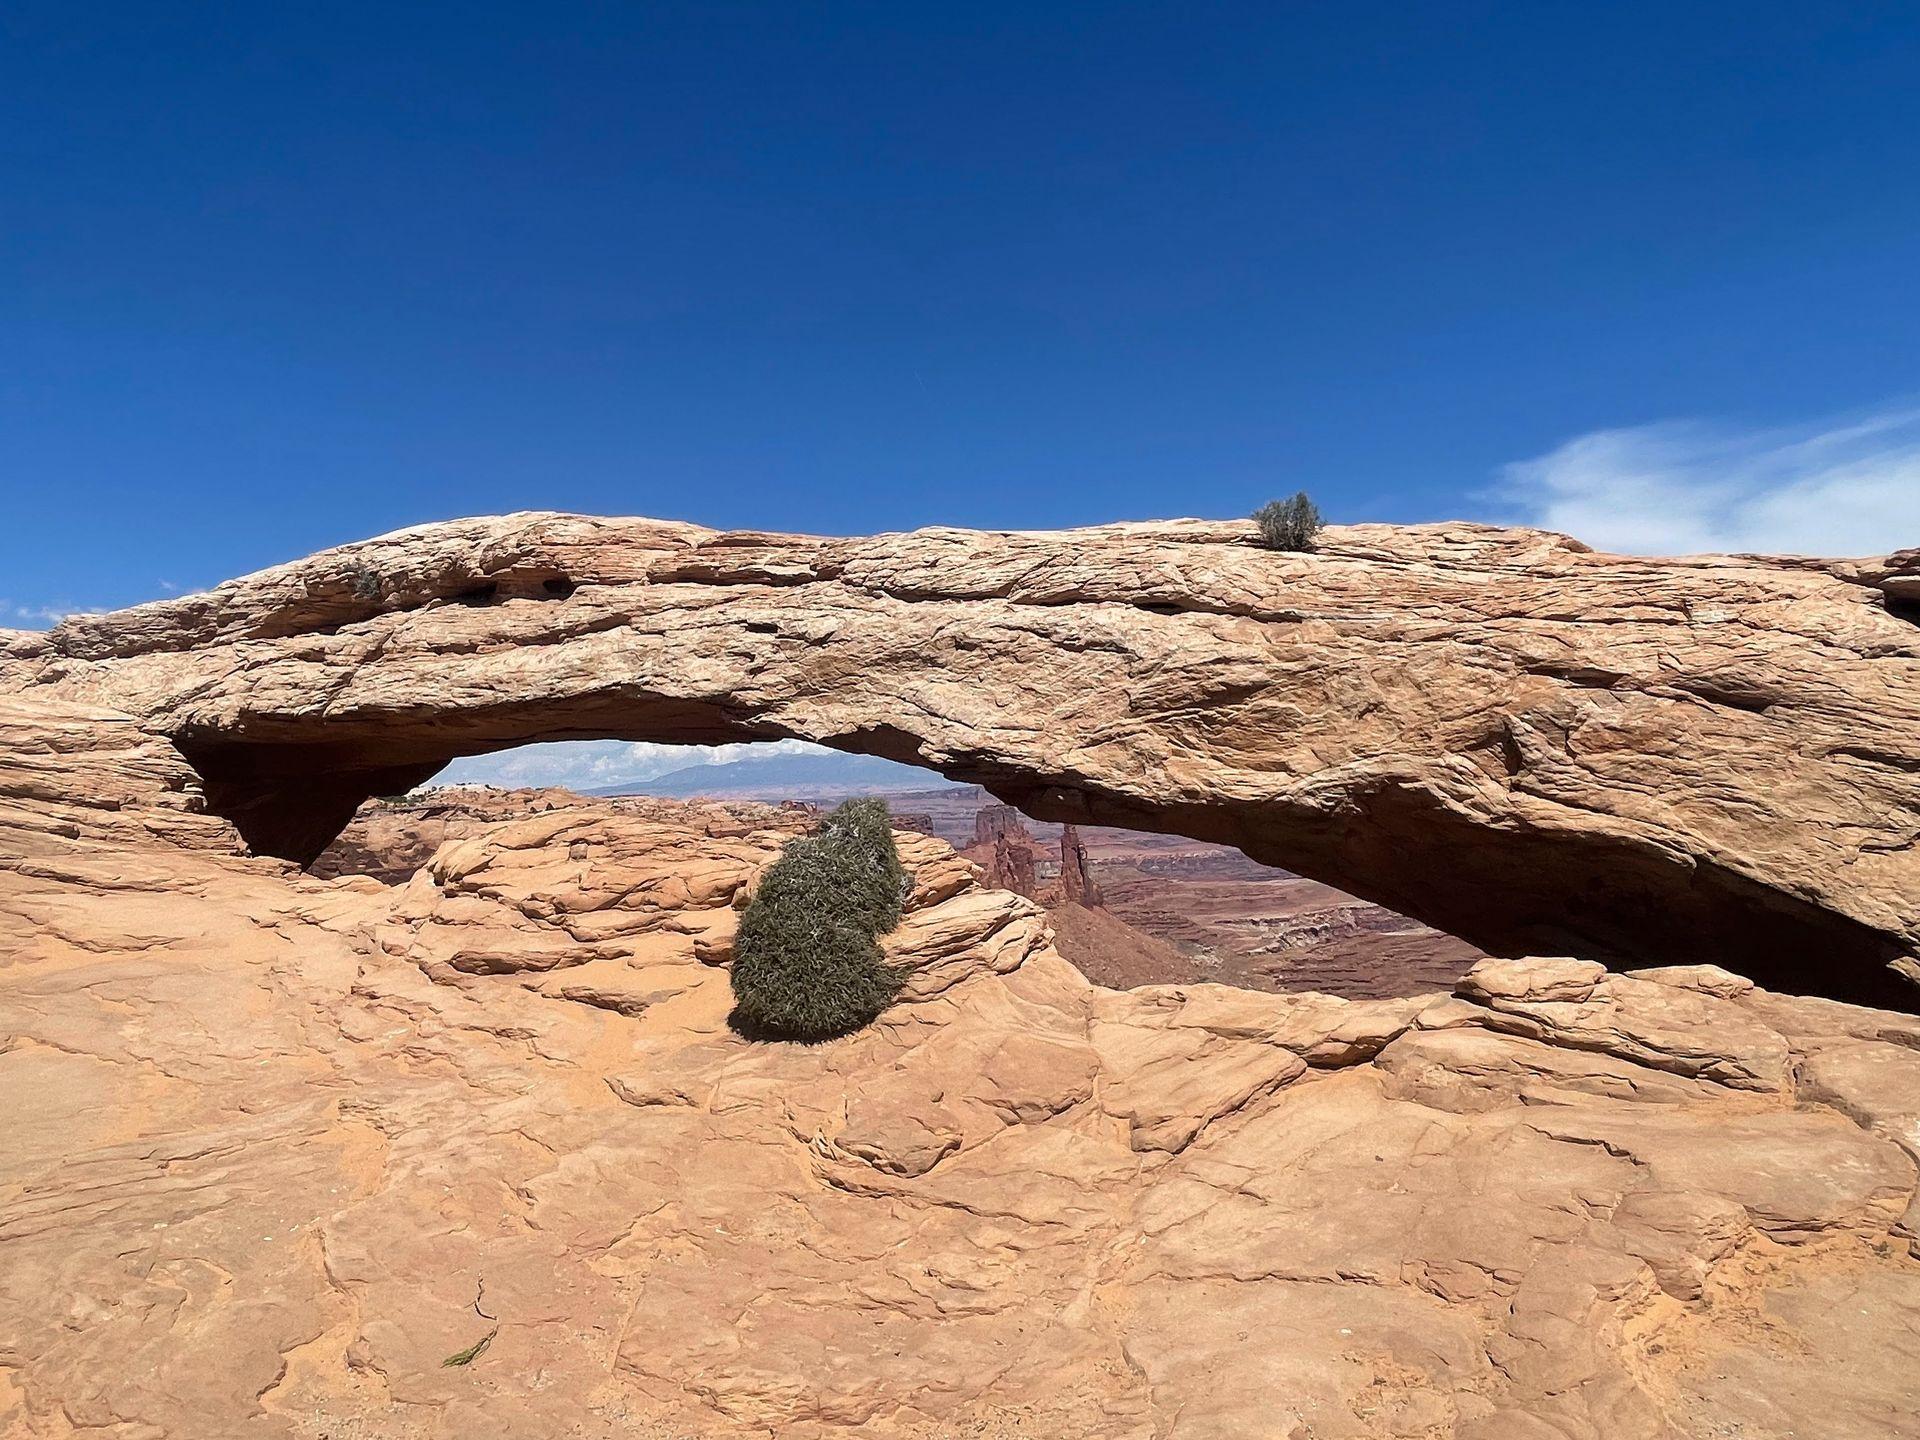 A view of the Mesa Arch in Canyonlands National Park